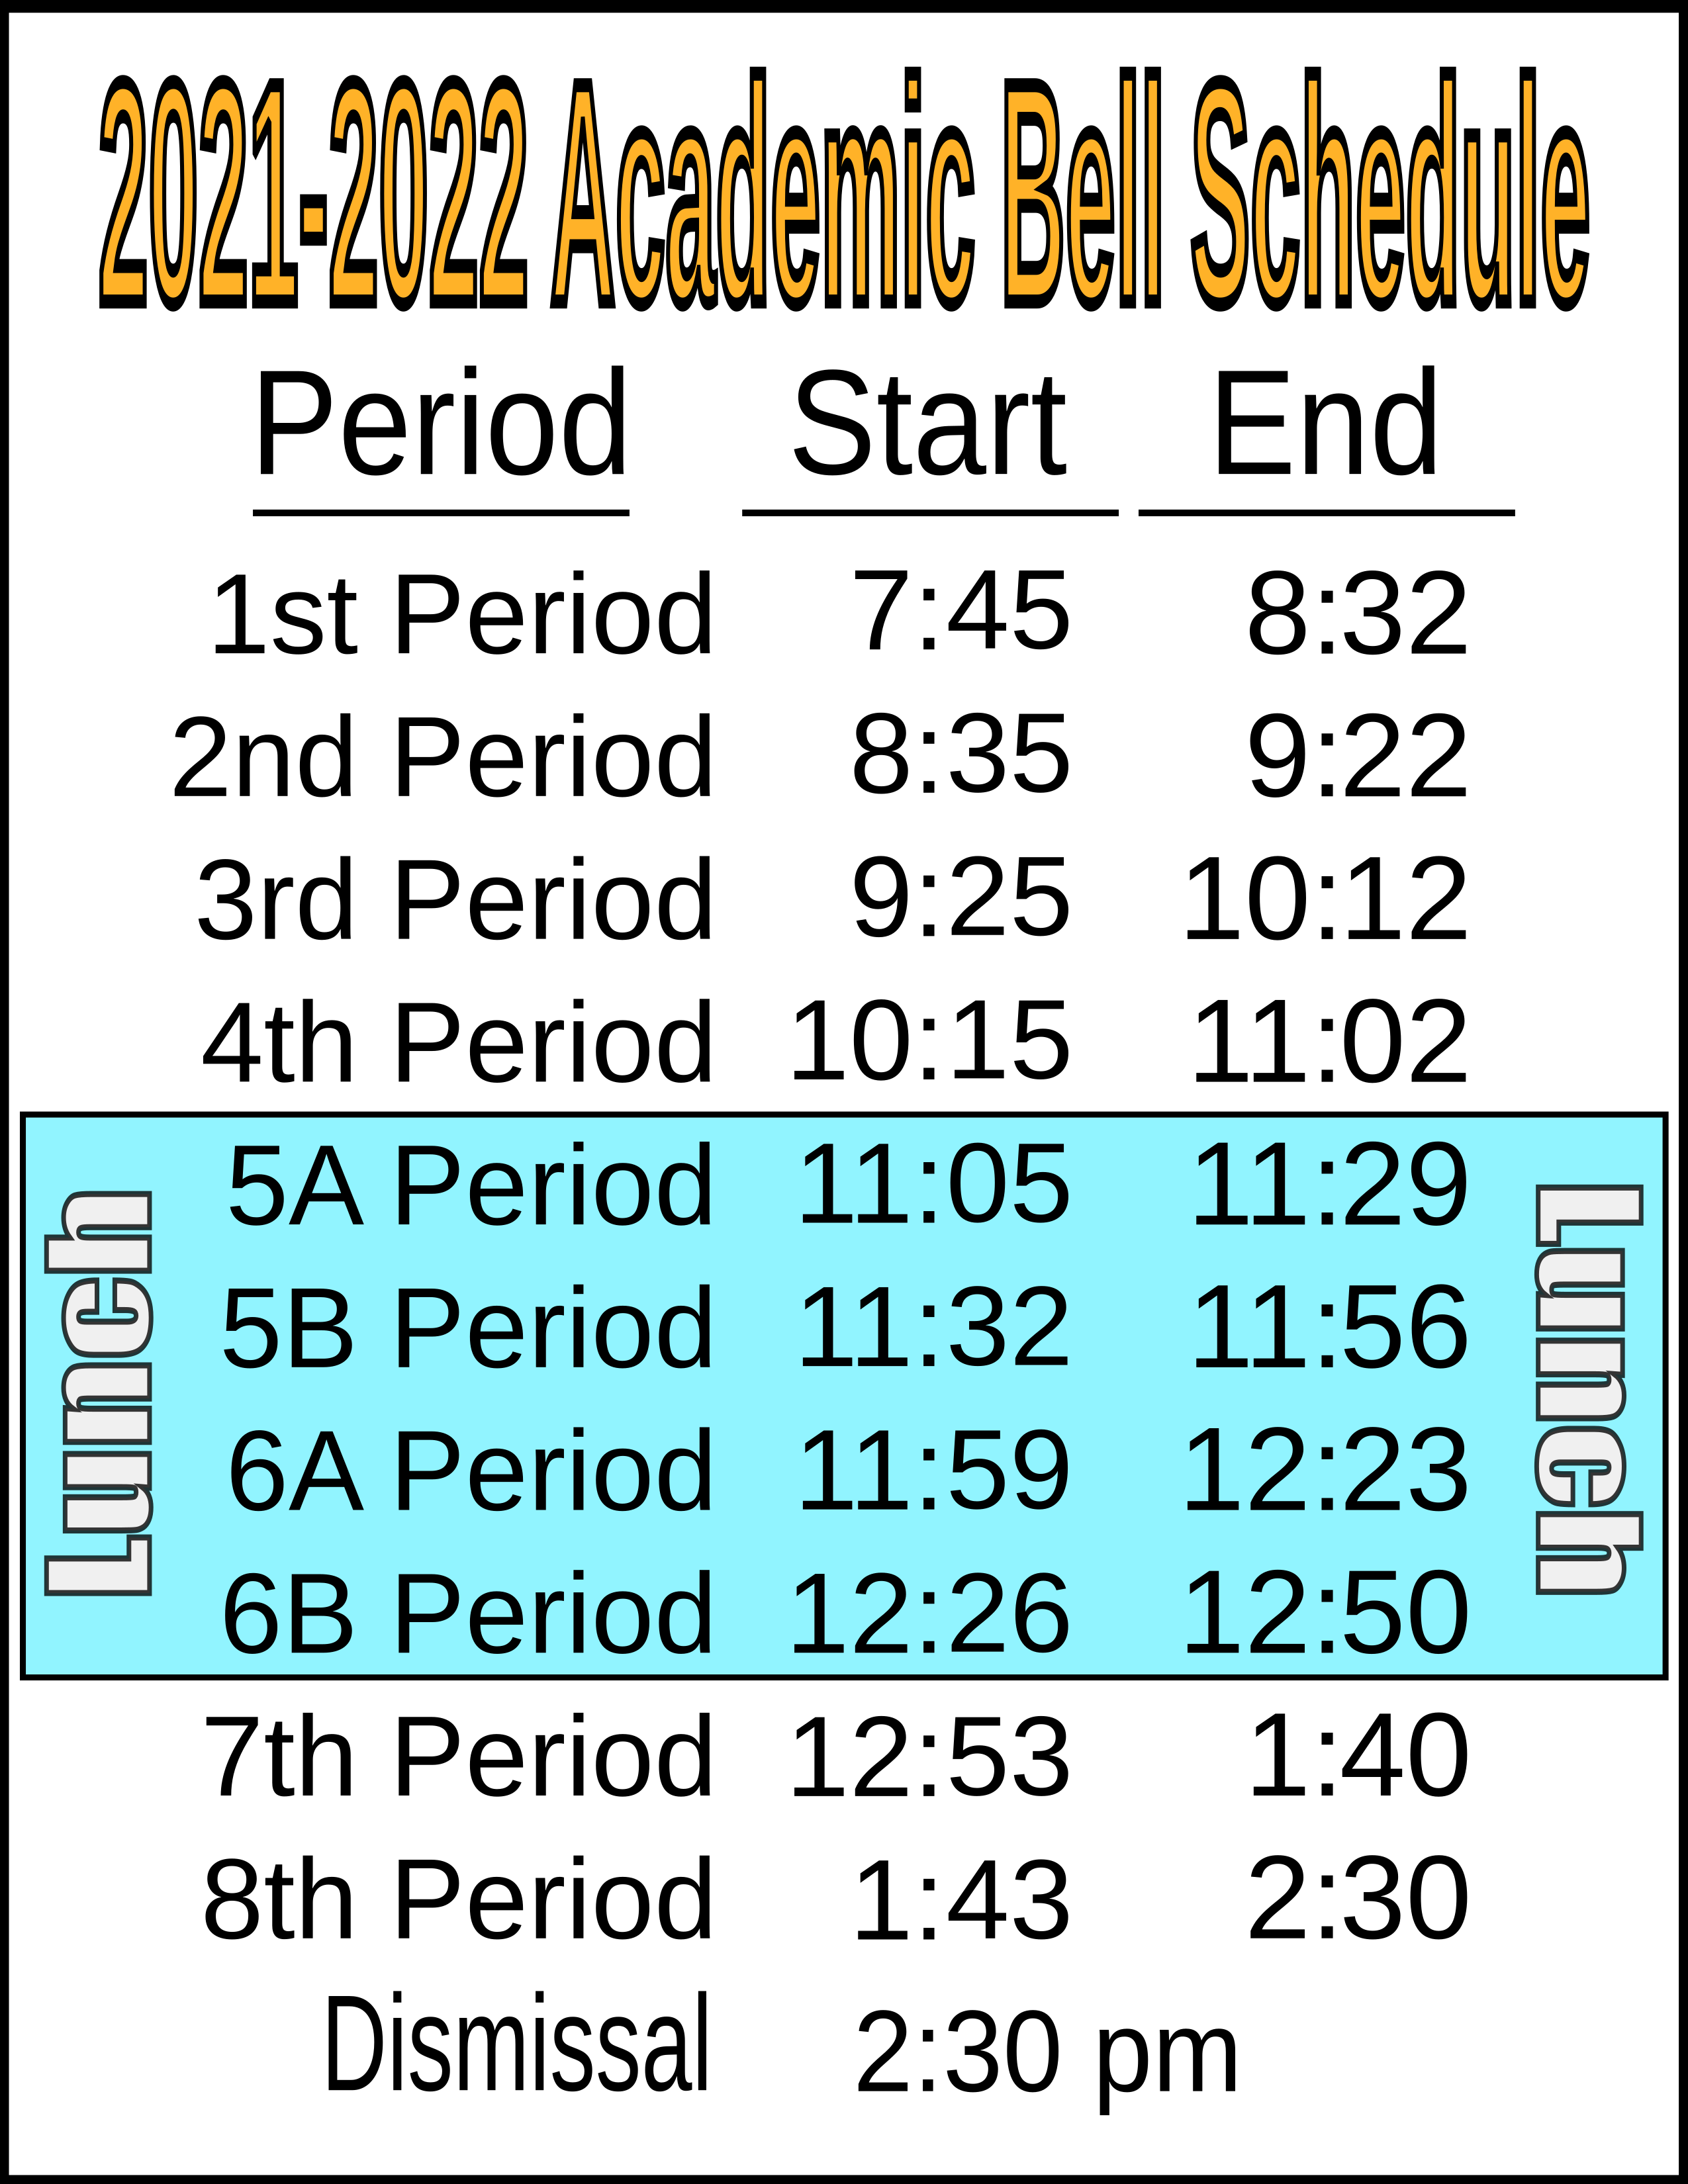 A letter-paper-sized bell schedule made with Inkscape. I added the black border so you can see page boundaries. Notice the narrow margins. The font size for the start / end times is about 42-pt.